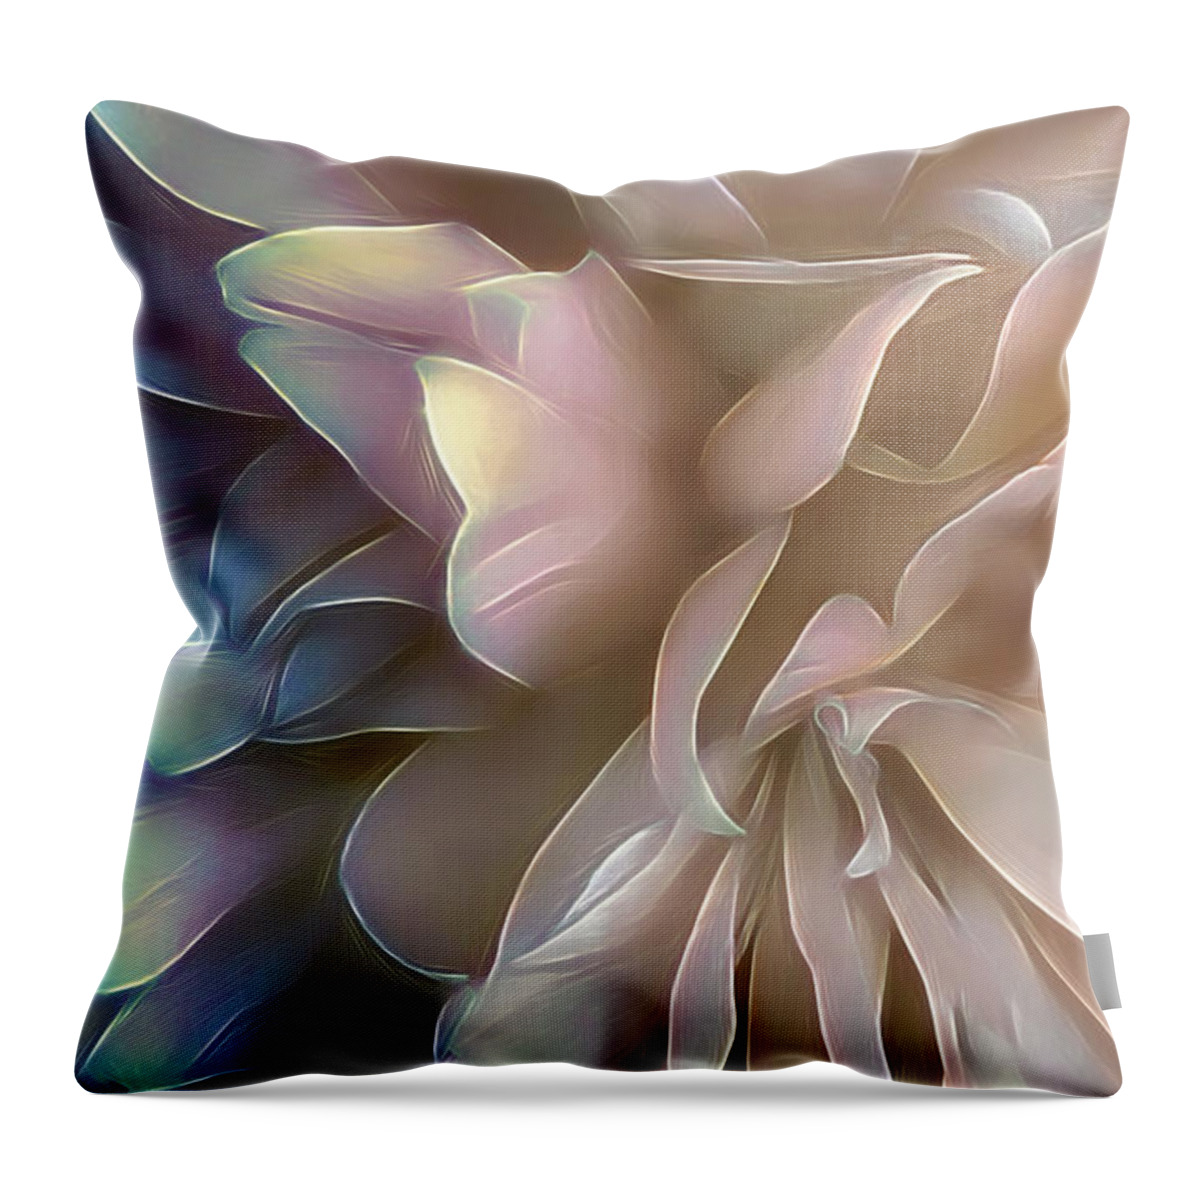 Floral Throw Pillow featuring the photograph Valley Breeze by Darlene Kwiatkowski